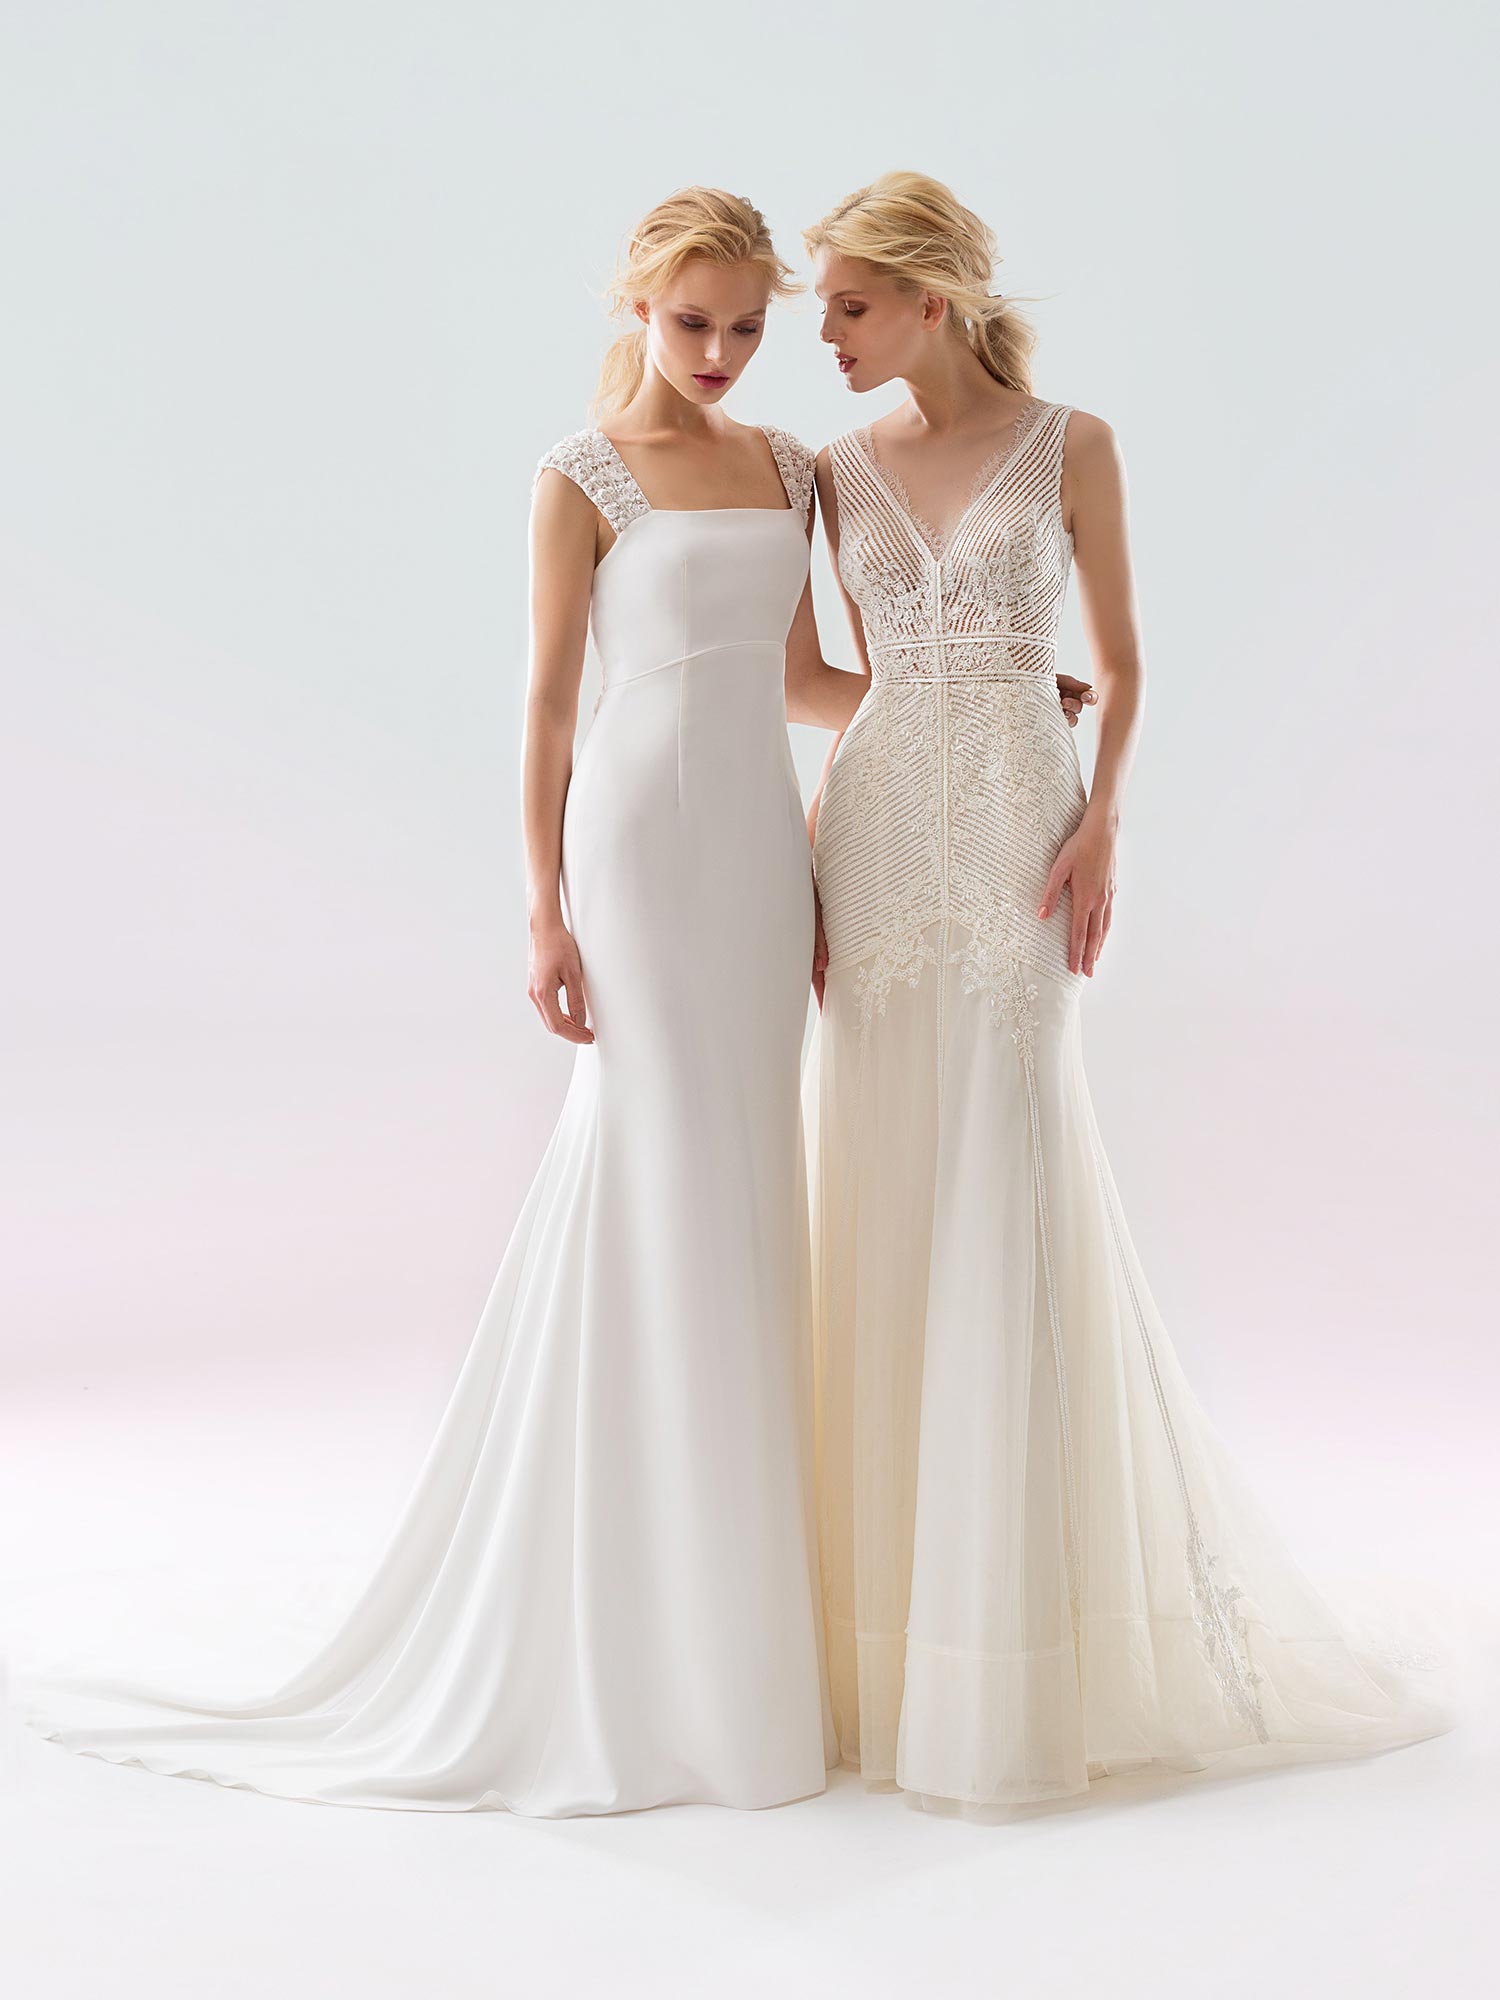 Papilio Fit and flare wedding dress in sequinned lace and deep v neck